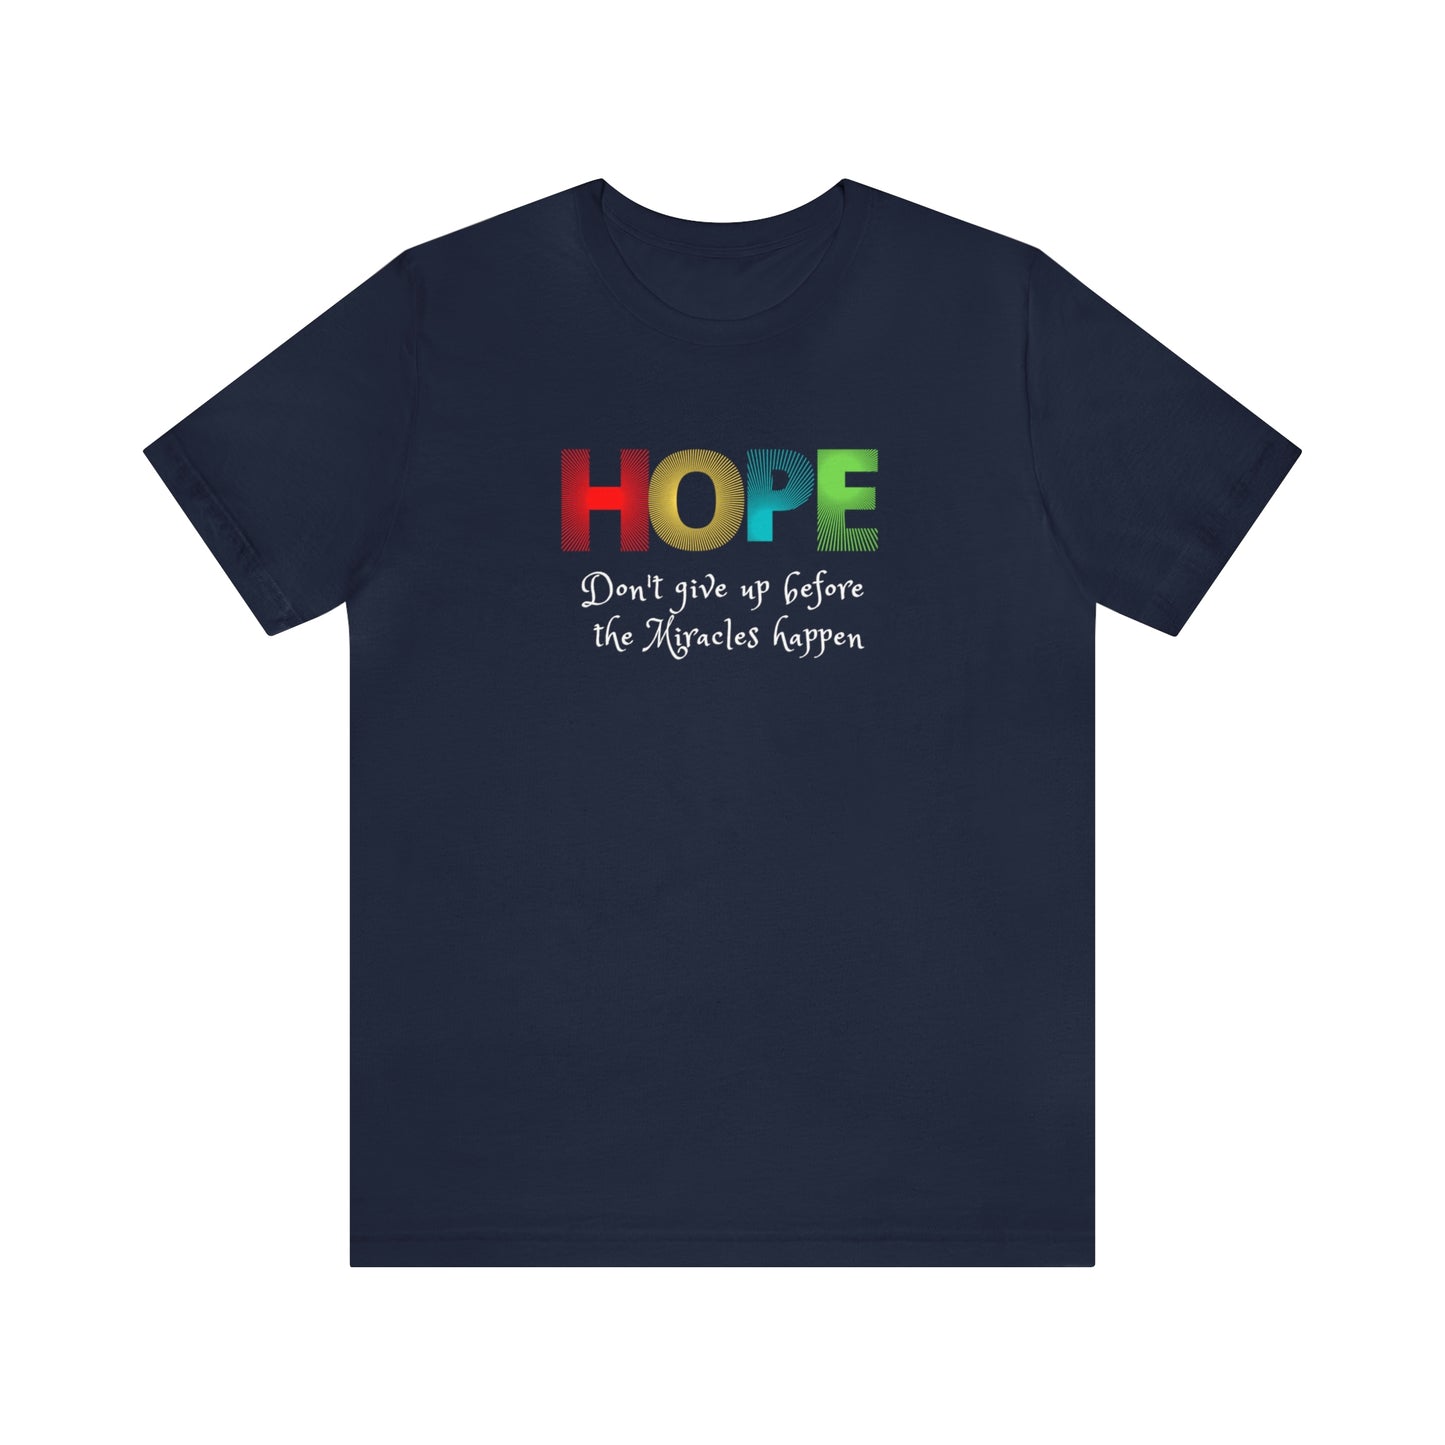 "HOPE Don't Give Up Before the Miracles Happen" Short Sleeve Unisex Tee